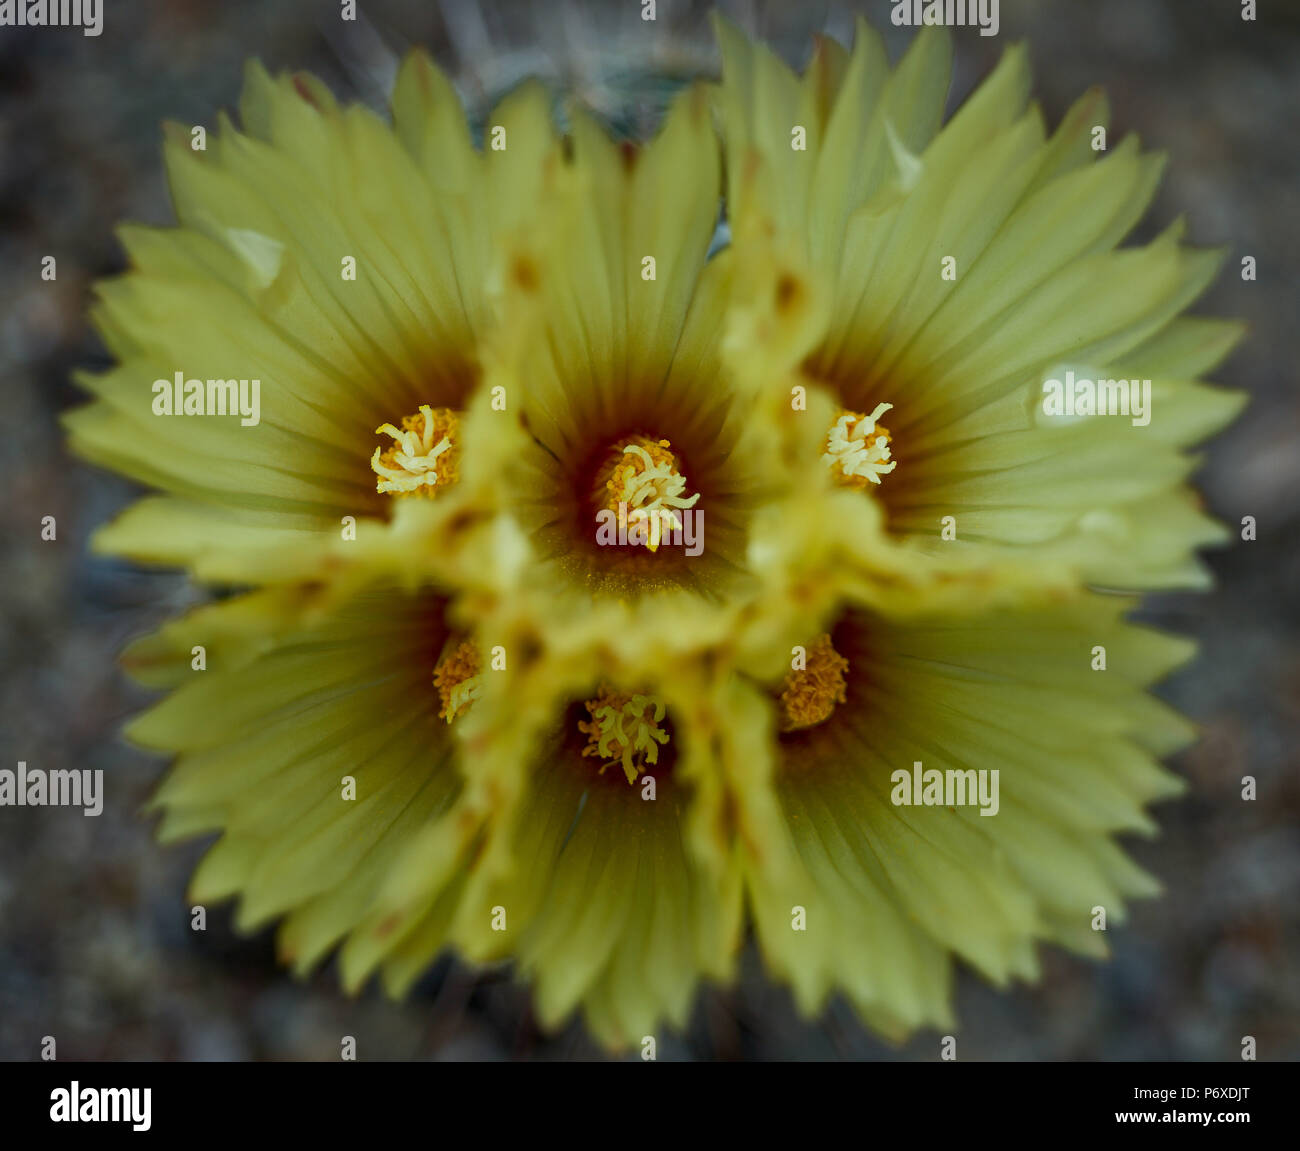 Lush multiple yellow cactus flowers Coryphantha beehive cactus lush blossom flowering blooming flowers close up Stock Photo